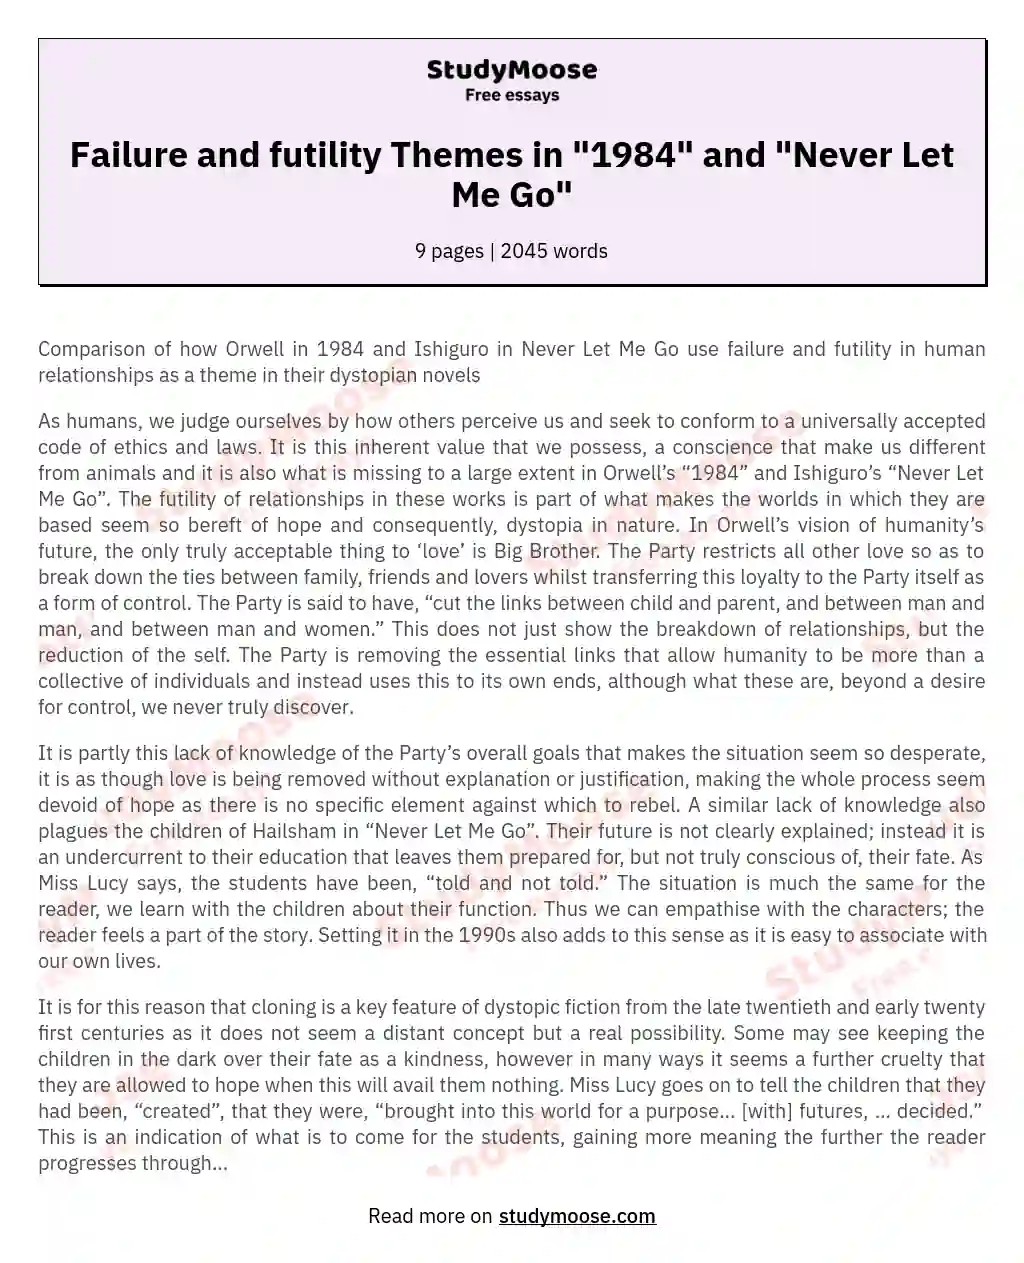 Failure and futility Themes in "1984" and "Never Let Me Go" essay